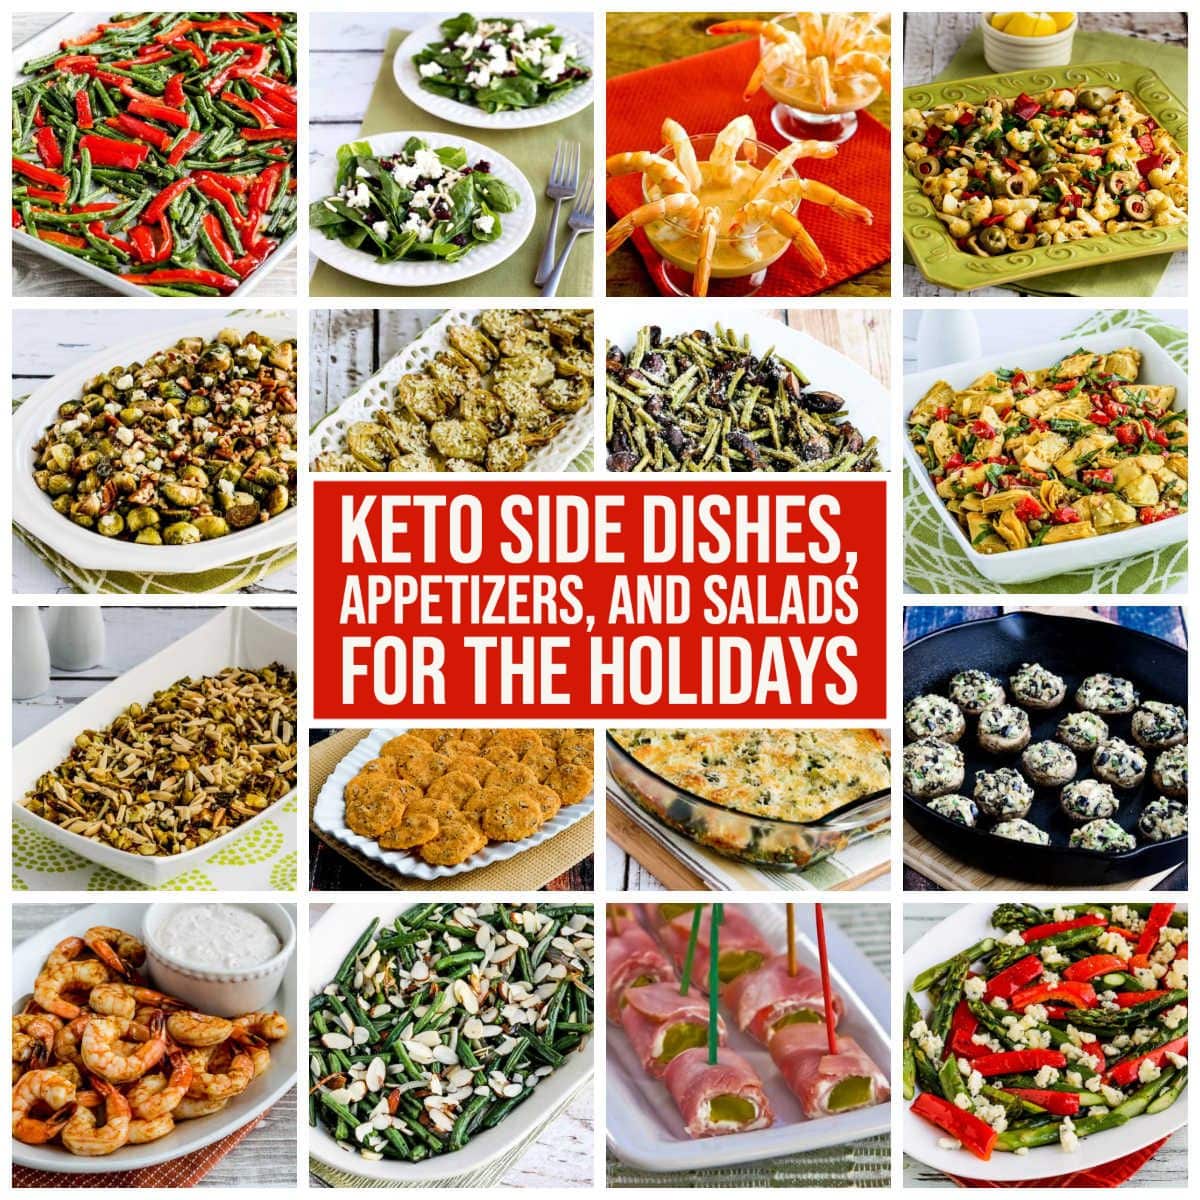 Keto side dishes, appetizers, and salads for Holidays' collection of signature recipes with text overlay